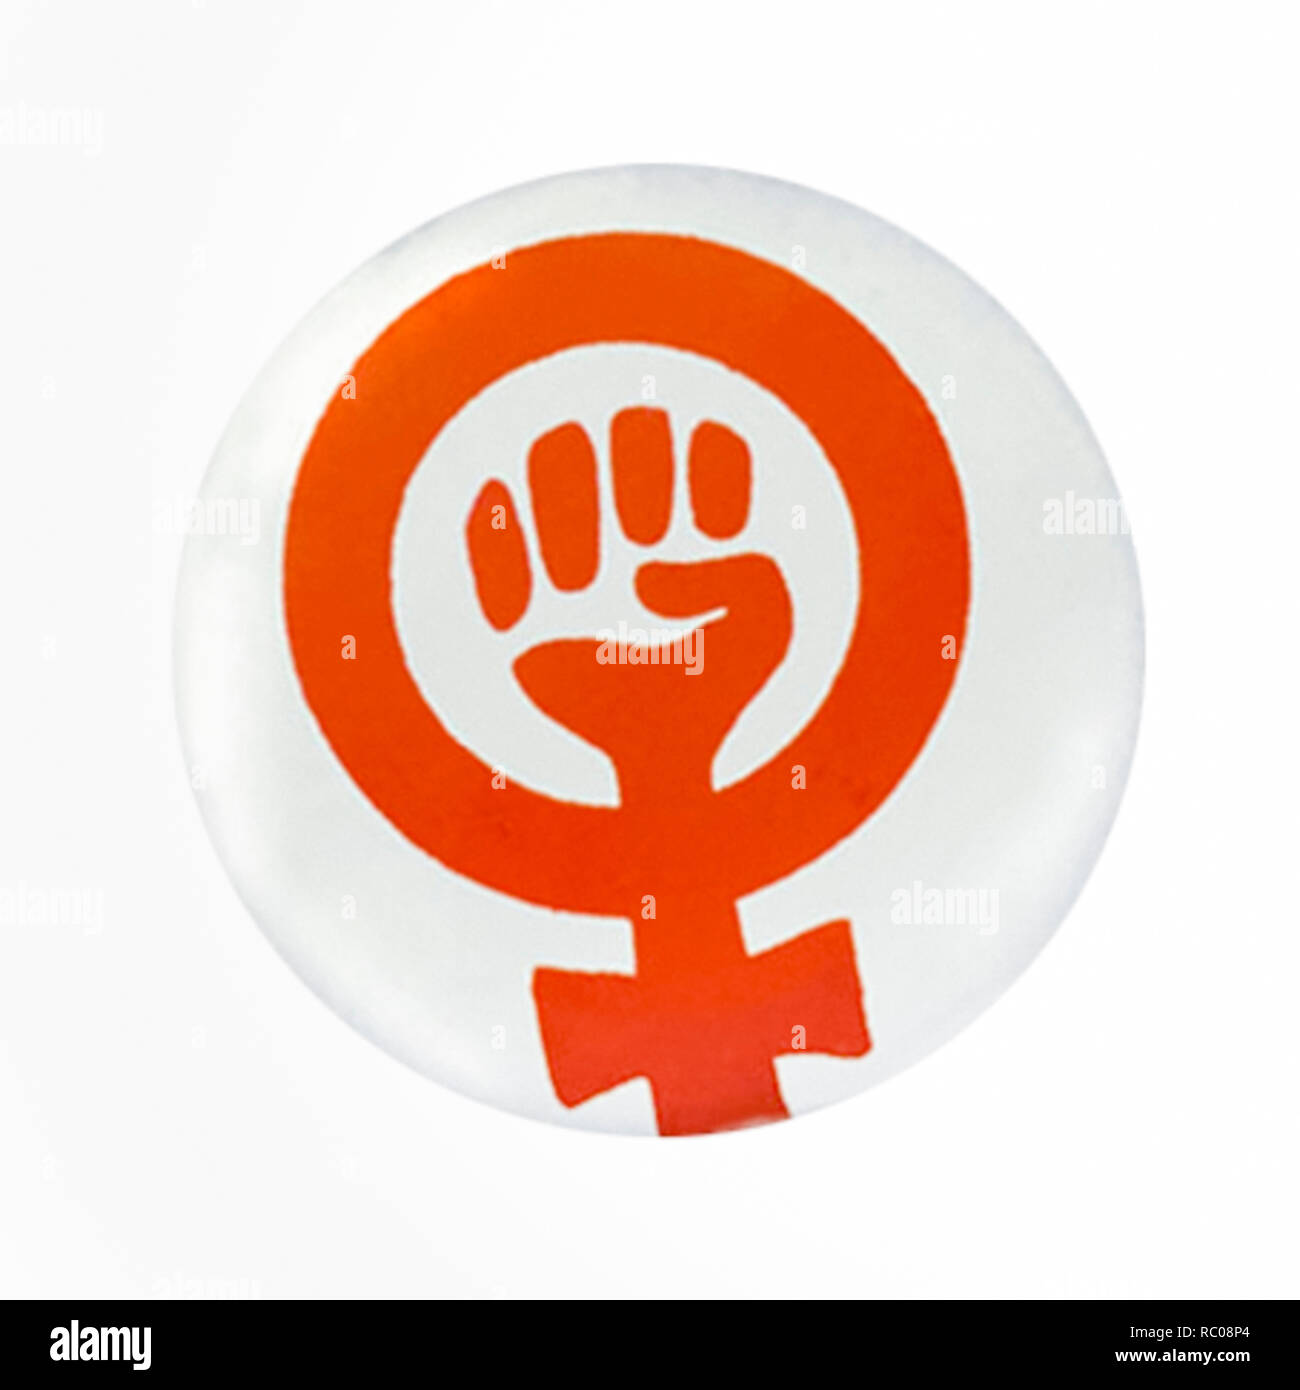 Women's liberation movement (WLM) button badge circa 1970 featuring one of its symbols, a clenched fist inside a Venus sign. See more information below. Stock Photo